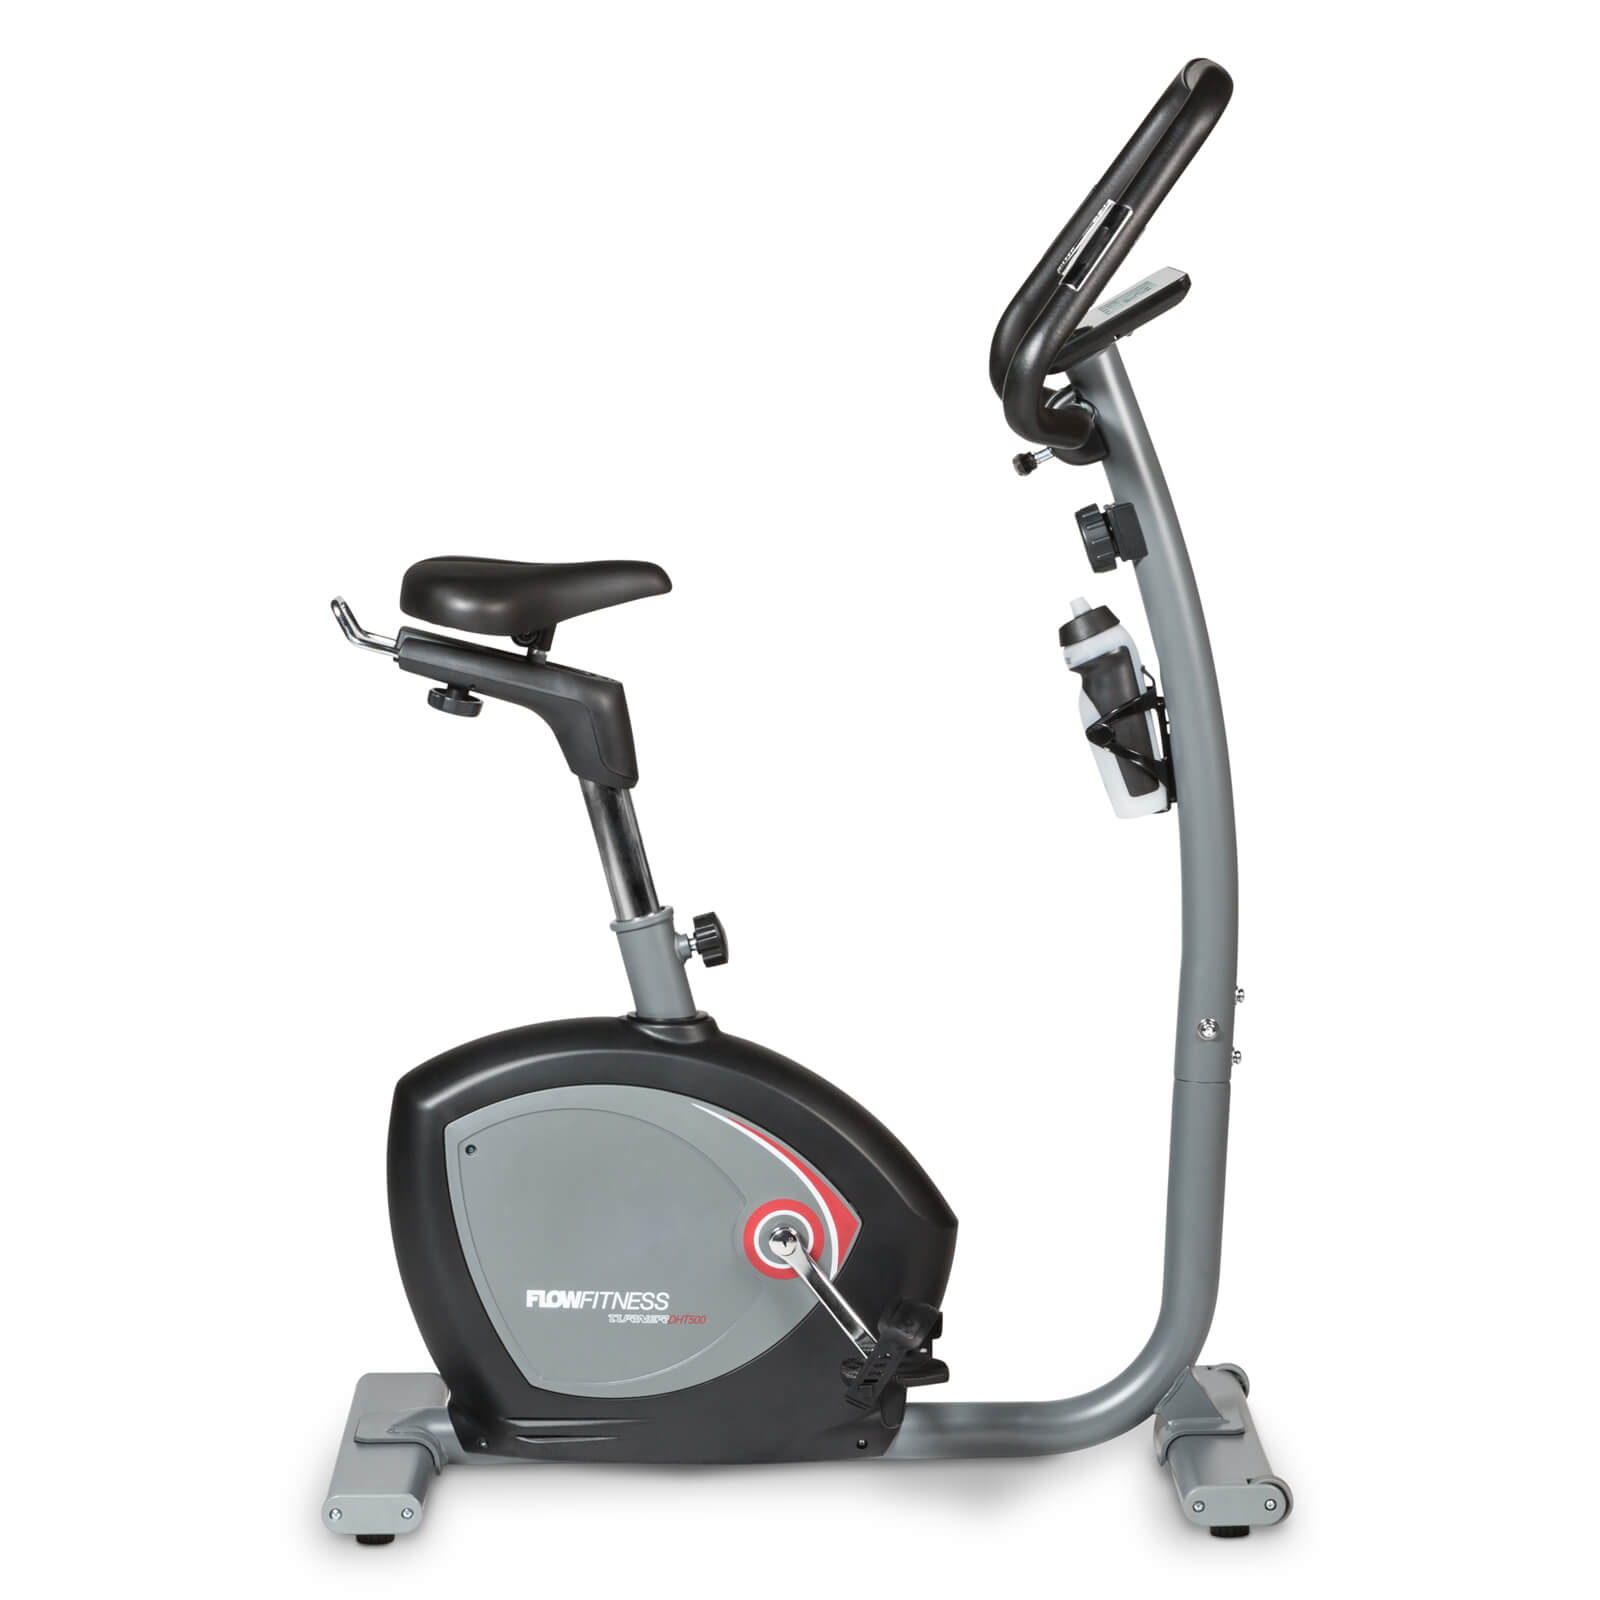   FLOW FITNESS DHT500